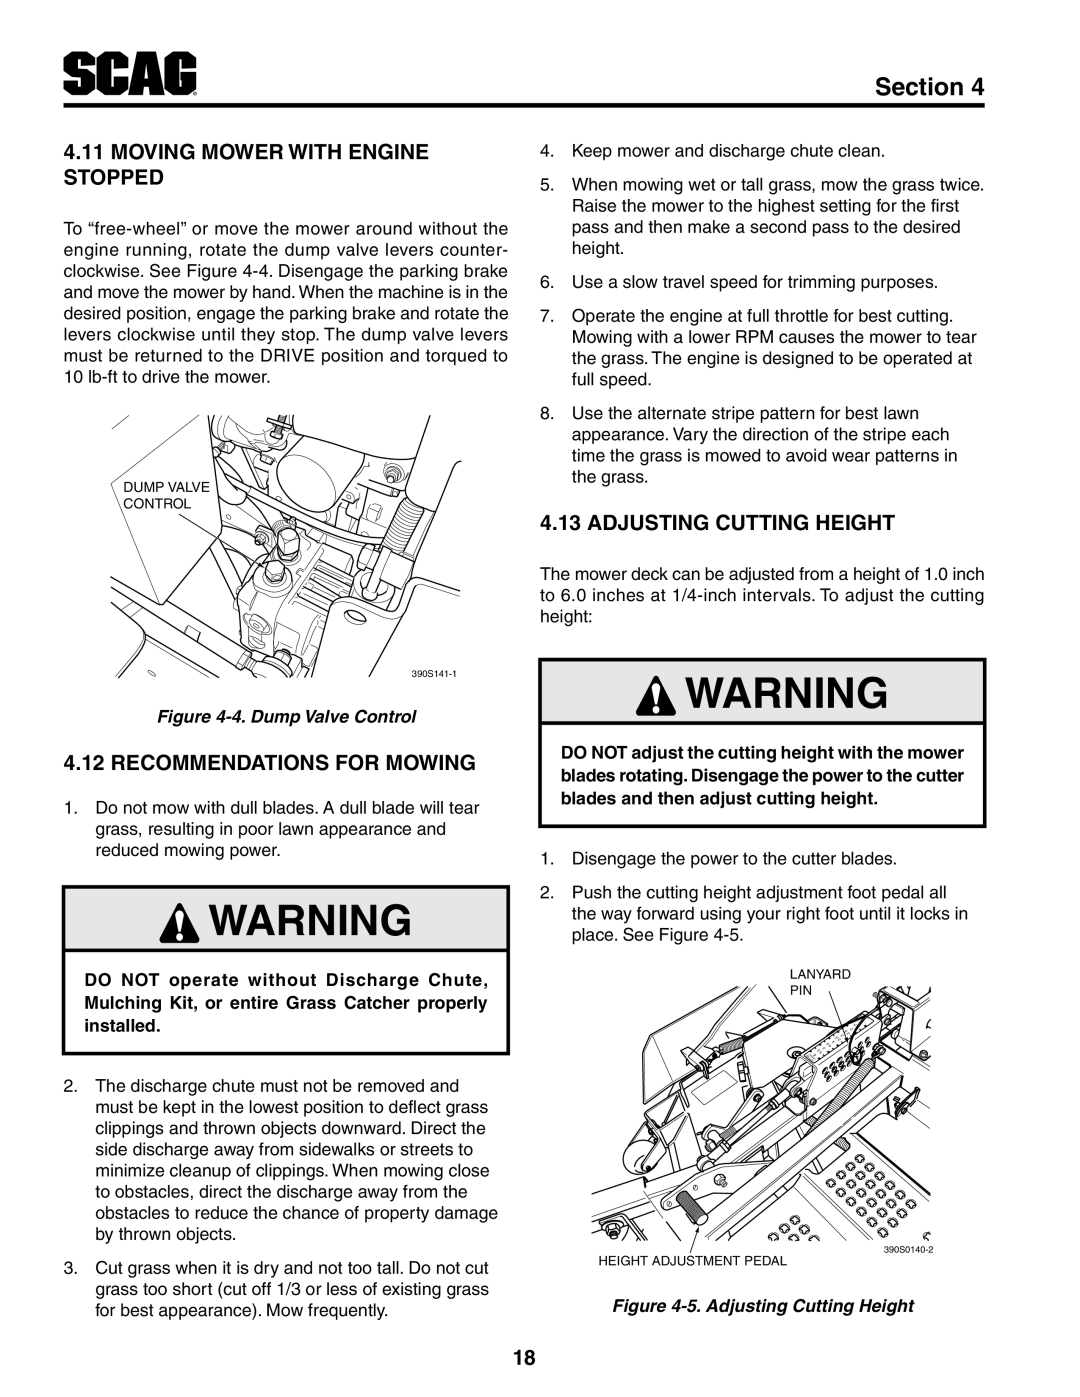 Scag Power Equipment STT-35BVAC Moving Mower With Engine Stopped, Recommendations For Mowing, Adjusting Cutting Height 